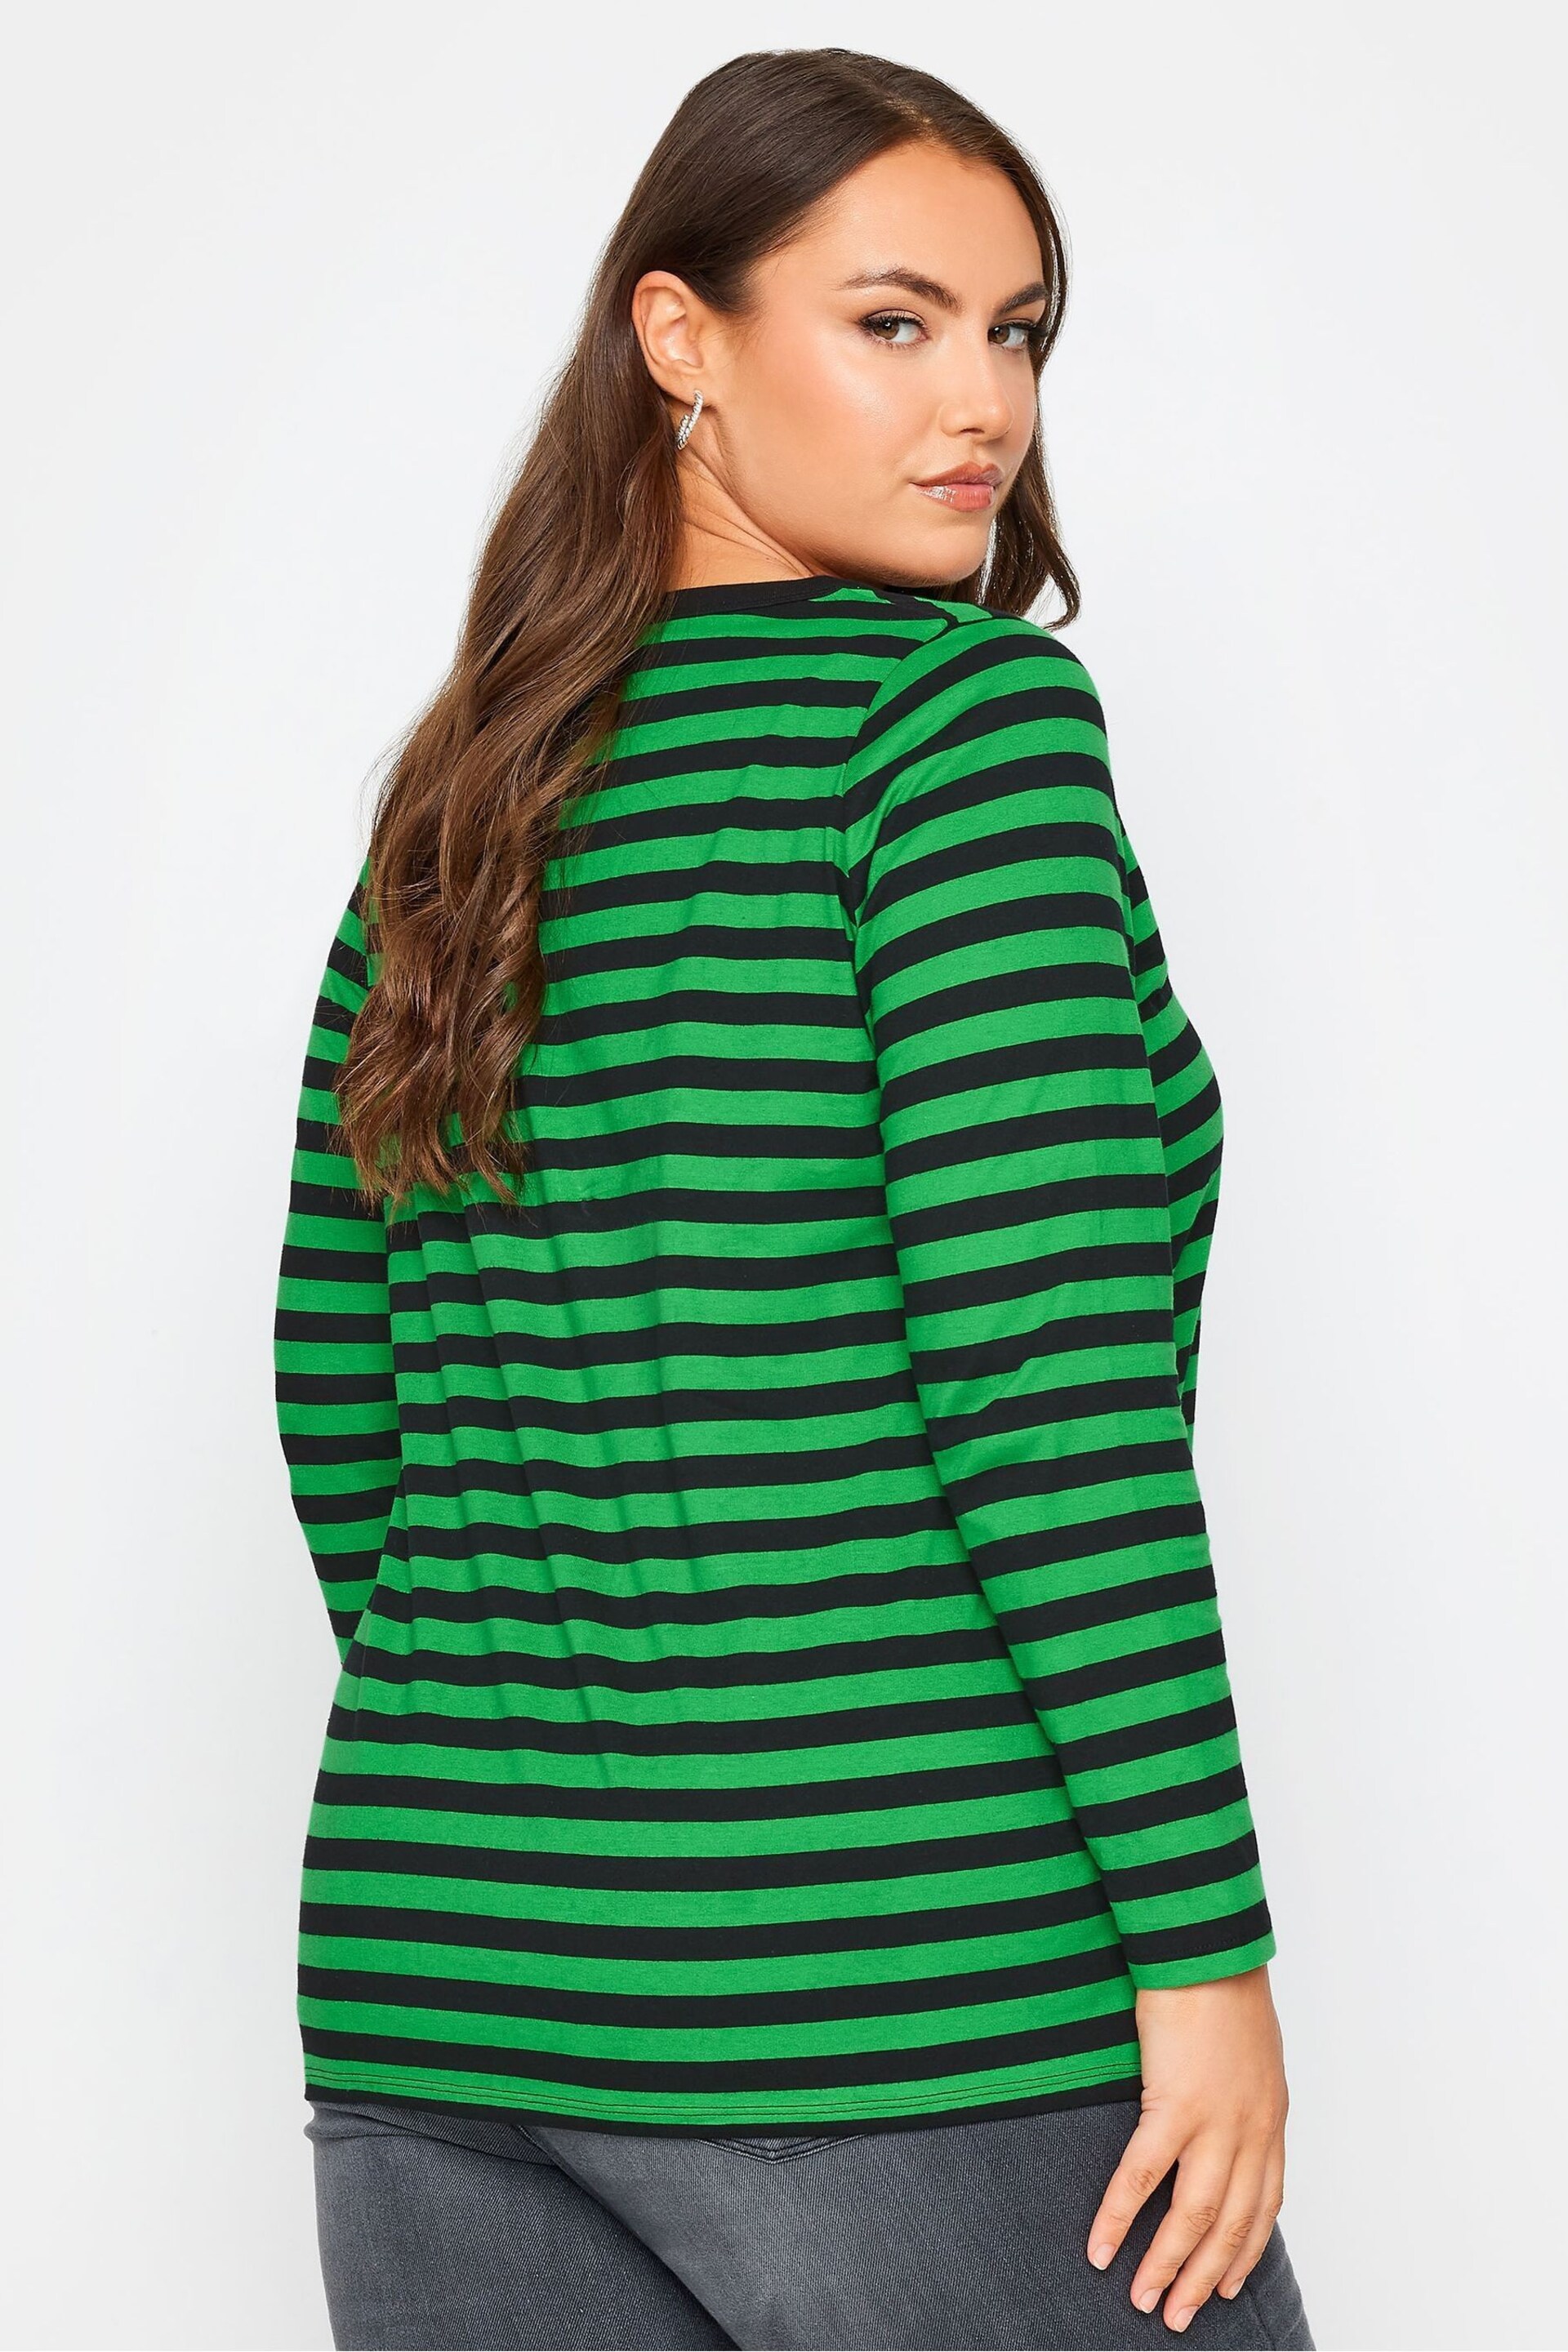 Yours Curve Dark Green Longsleeve Stripe T-Shirts 2 Packs - Image 3 of 5